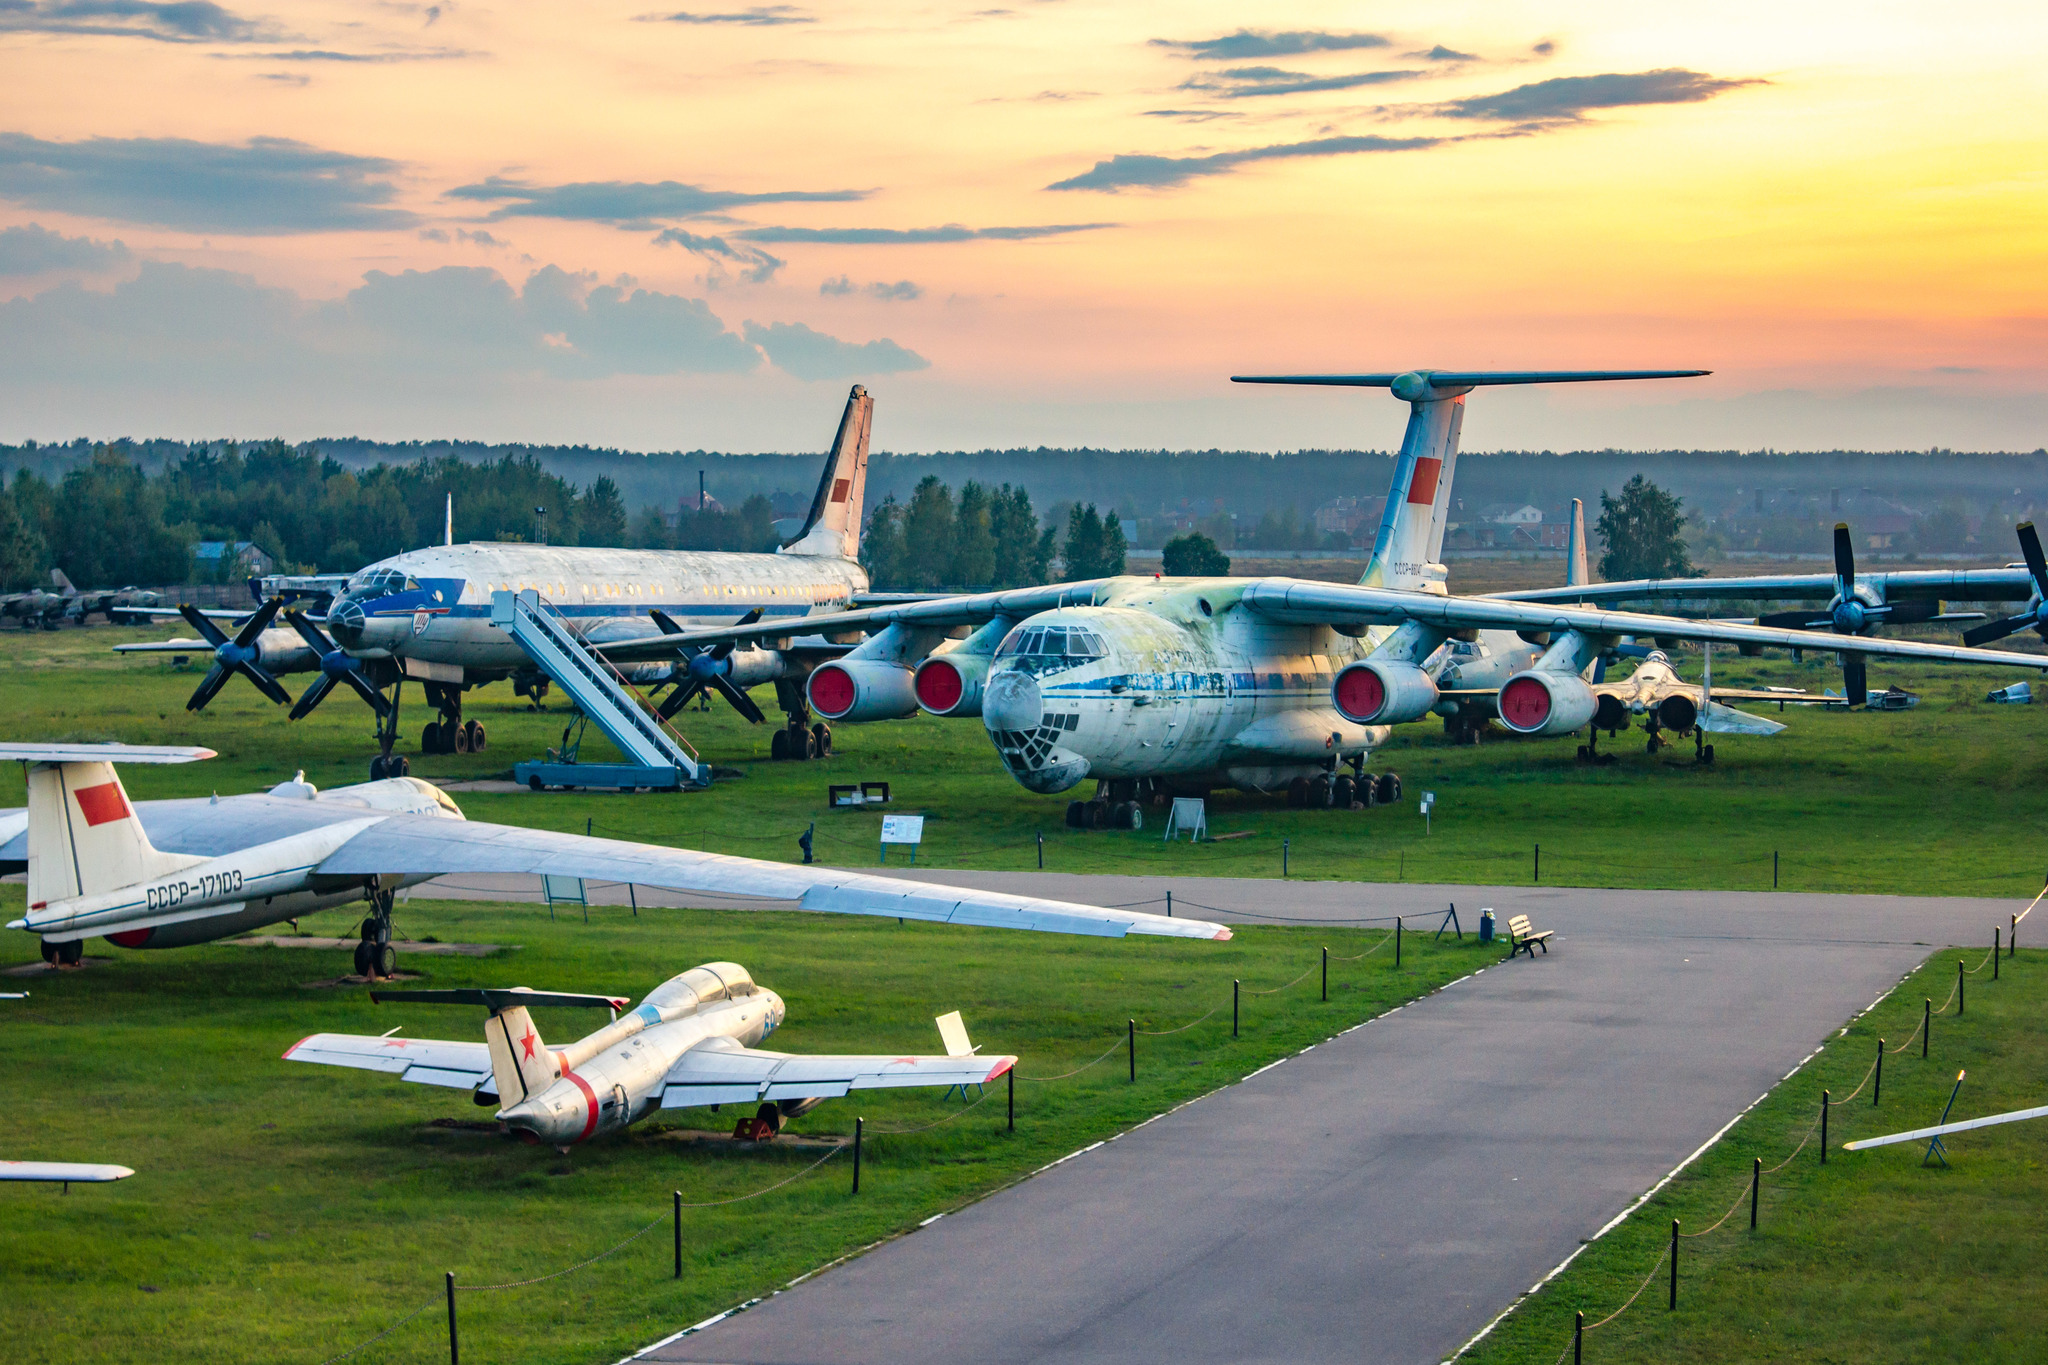 Another picturesque sunset at Monino National Aviation Museum - My, Monino, Air Force Museum in Monino, Museum, Aviation Museum, Airplane, Aviation, Air force, Longpost, BBC Museum